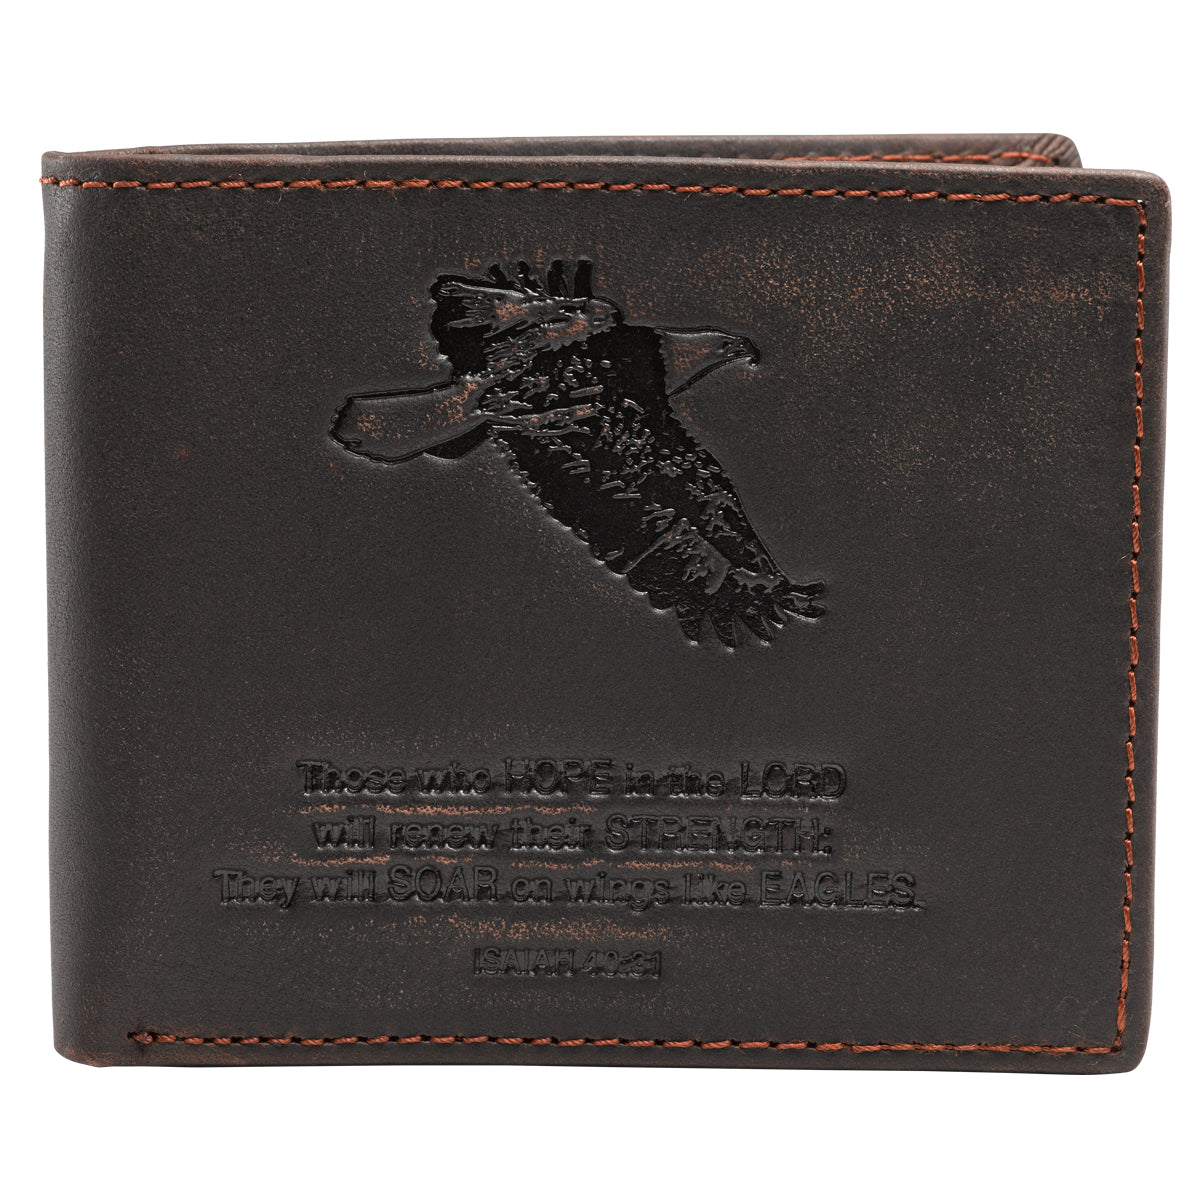 Image of Brown Genuine Leather Wallet - Isaiah 40:31 other